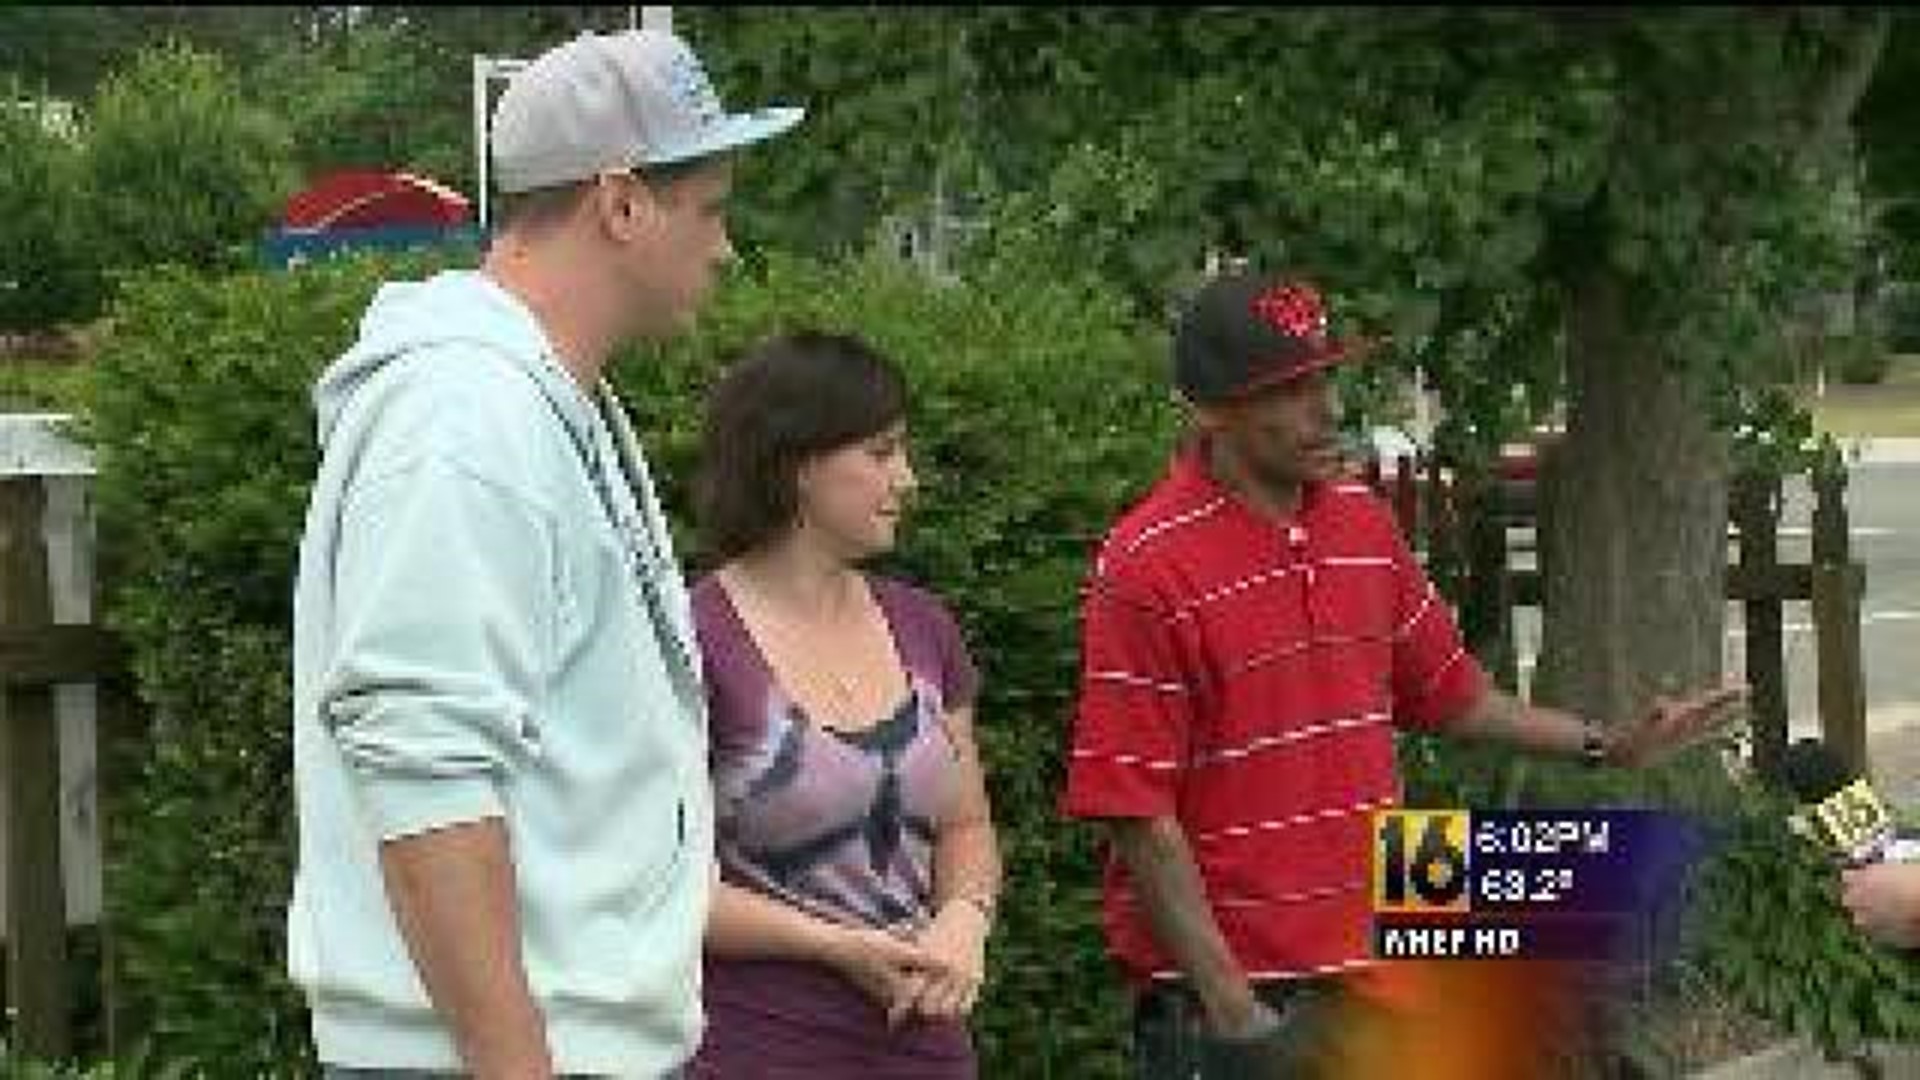 Family Reacts to Shooting in Sunbury